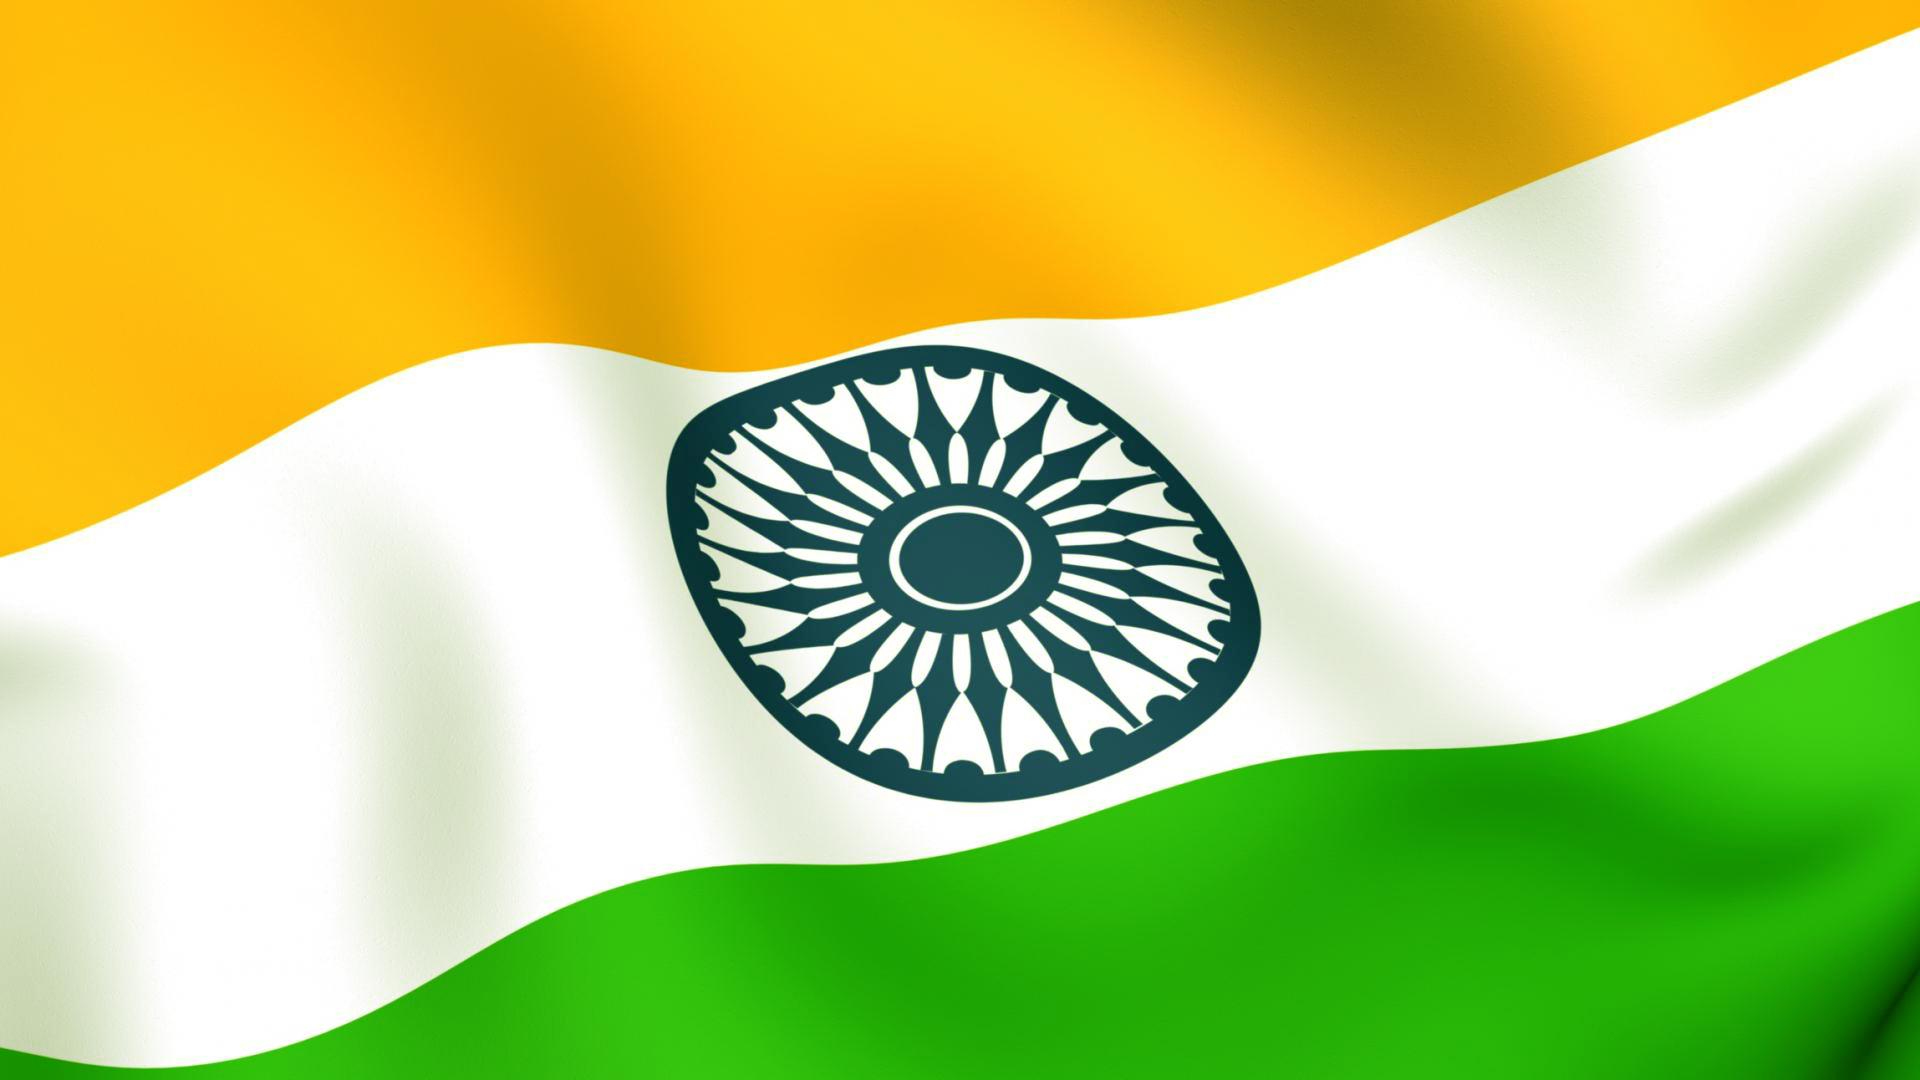 Free download New Indian Flag HD Wallpaper Image 2015 Happy